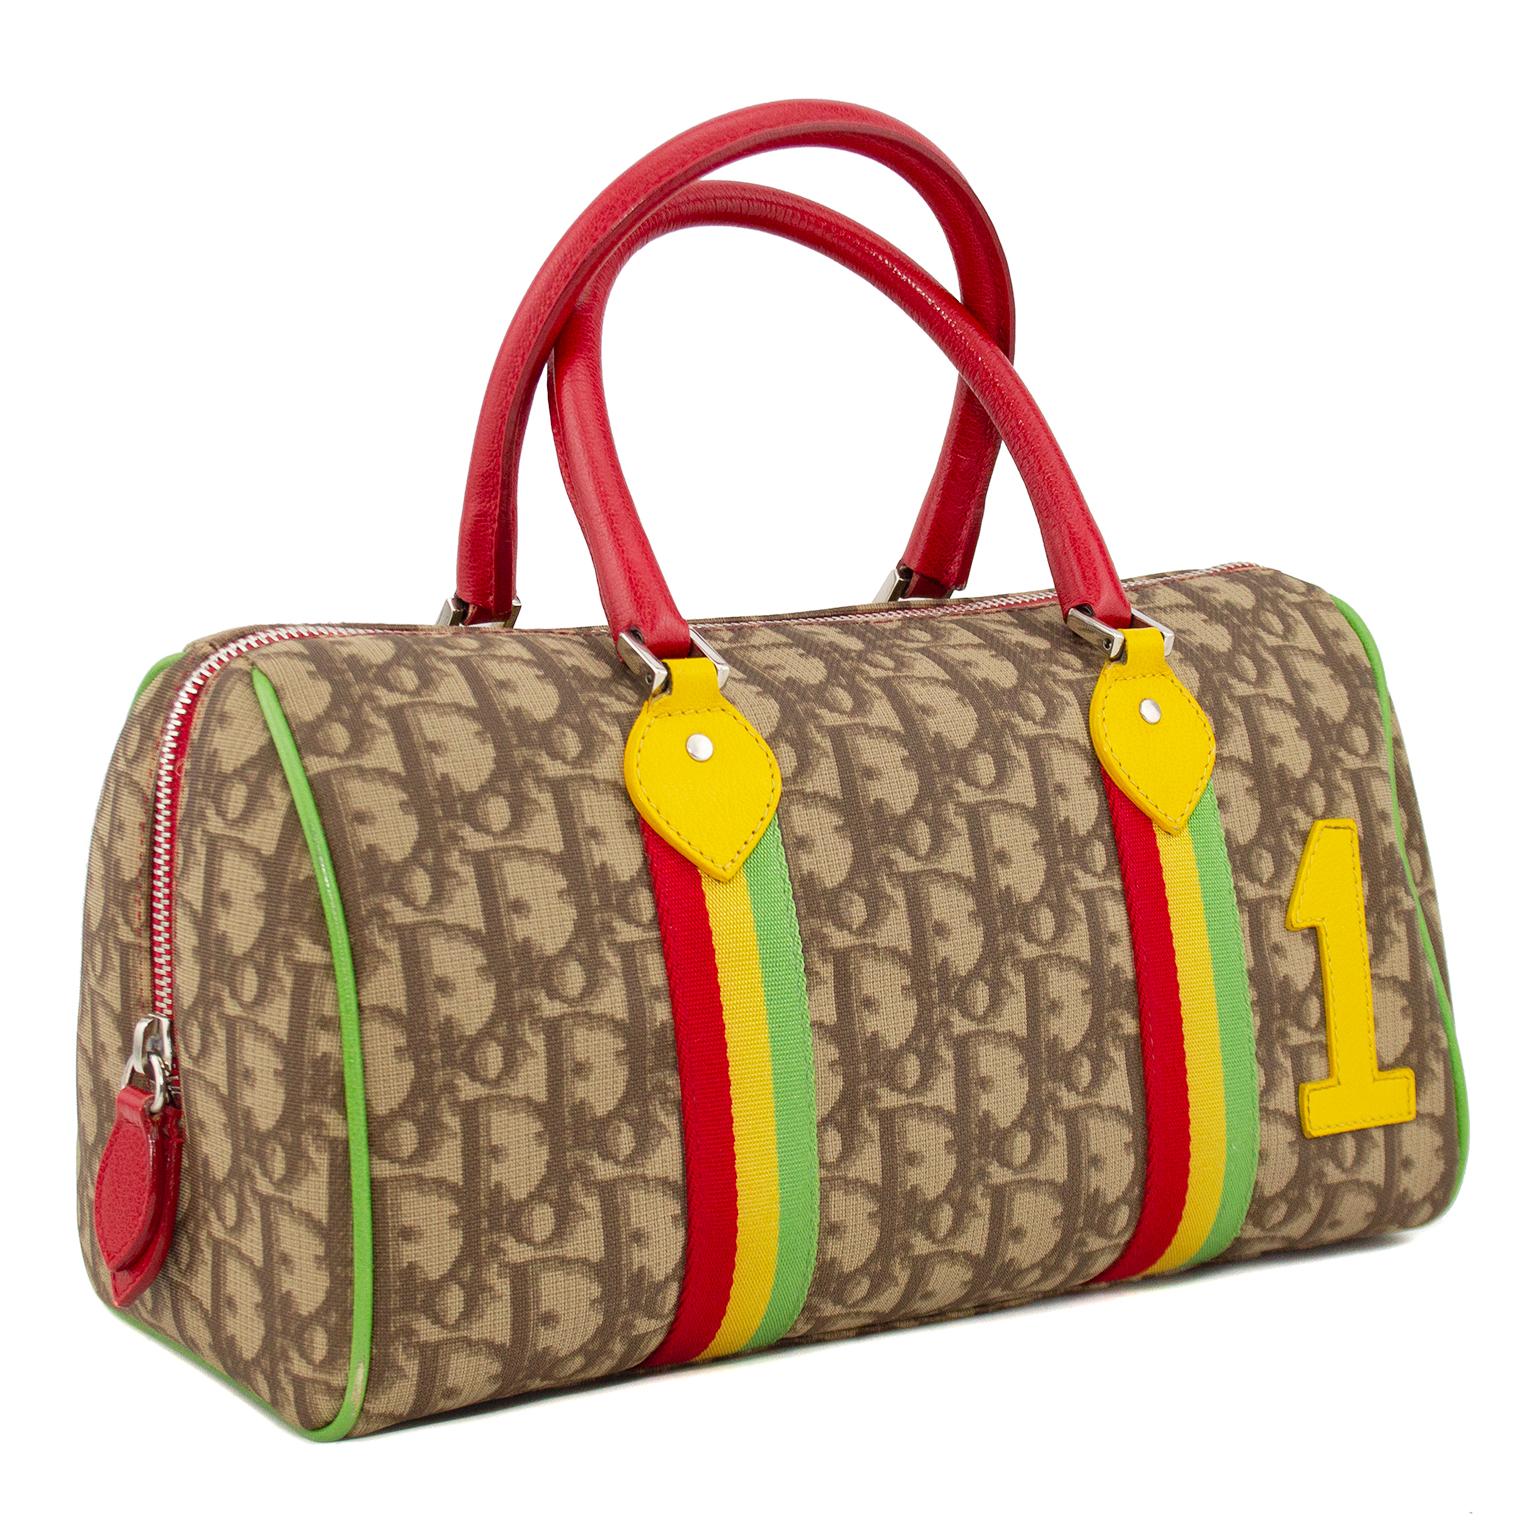 Christian Dior Boston bag from the early 2000's Rasta collection. Crafted from Christian Dior's signature DIOR printed canvas with Rasta inspired red, gold and green front stripes, red leather handles, green leather piping, yellow leather number 1,